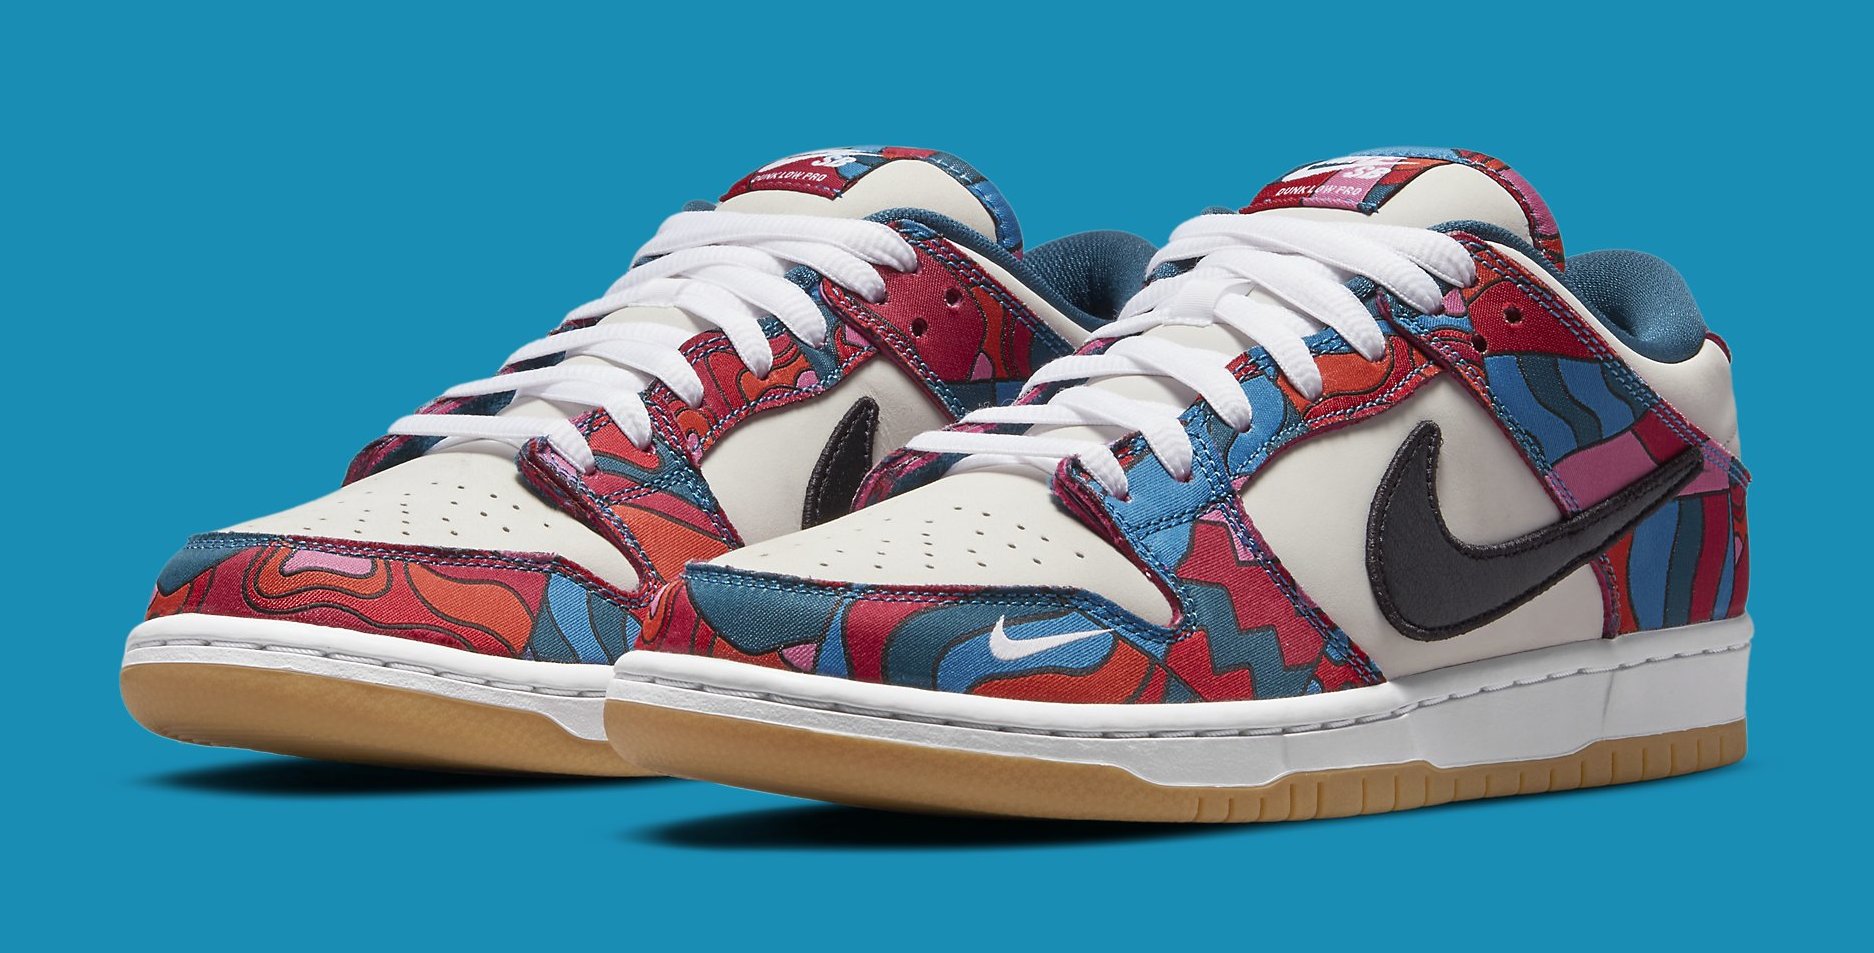 Parra's New Nike SB Dunk Collab Is Releasing This Month | Complex